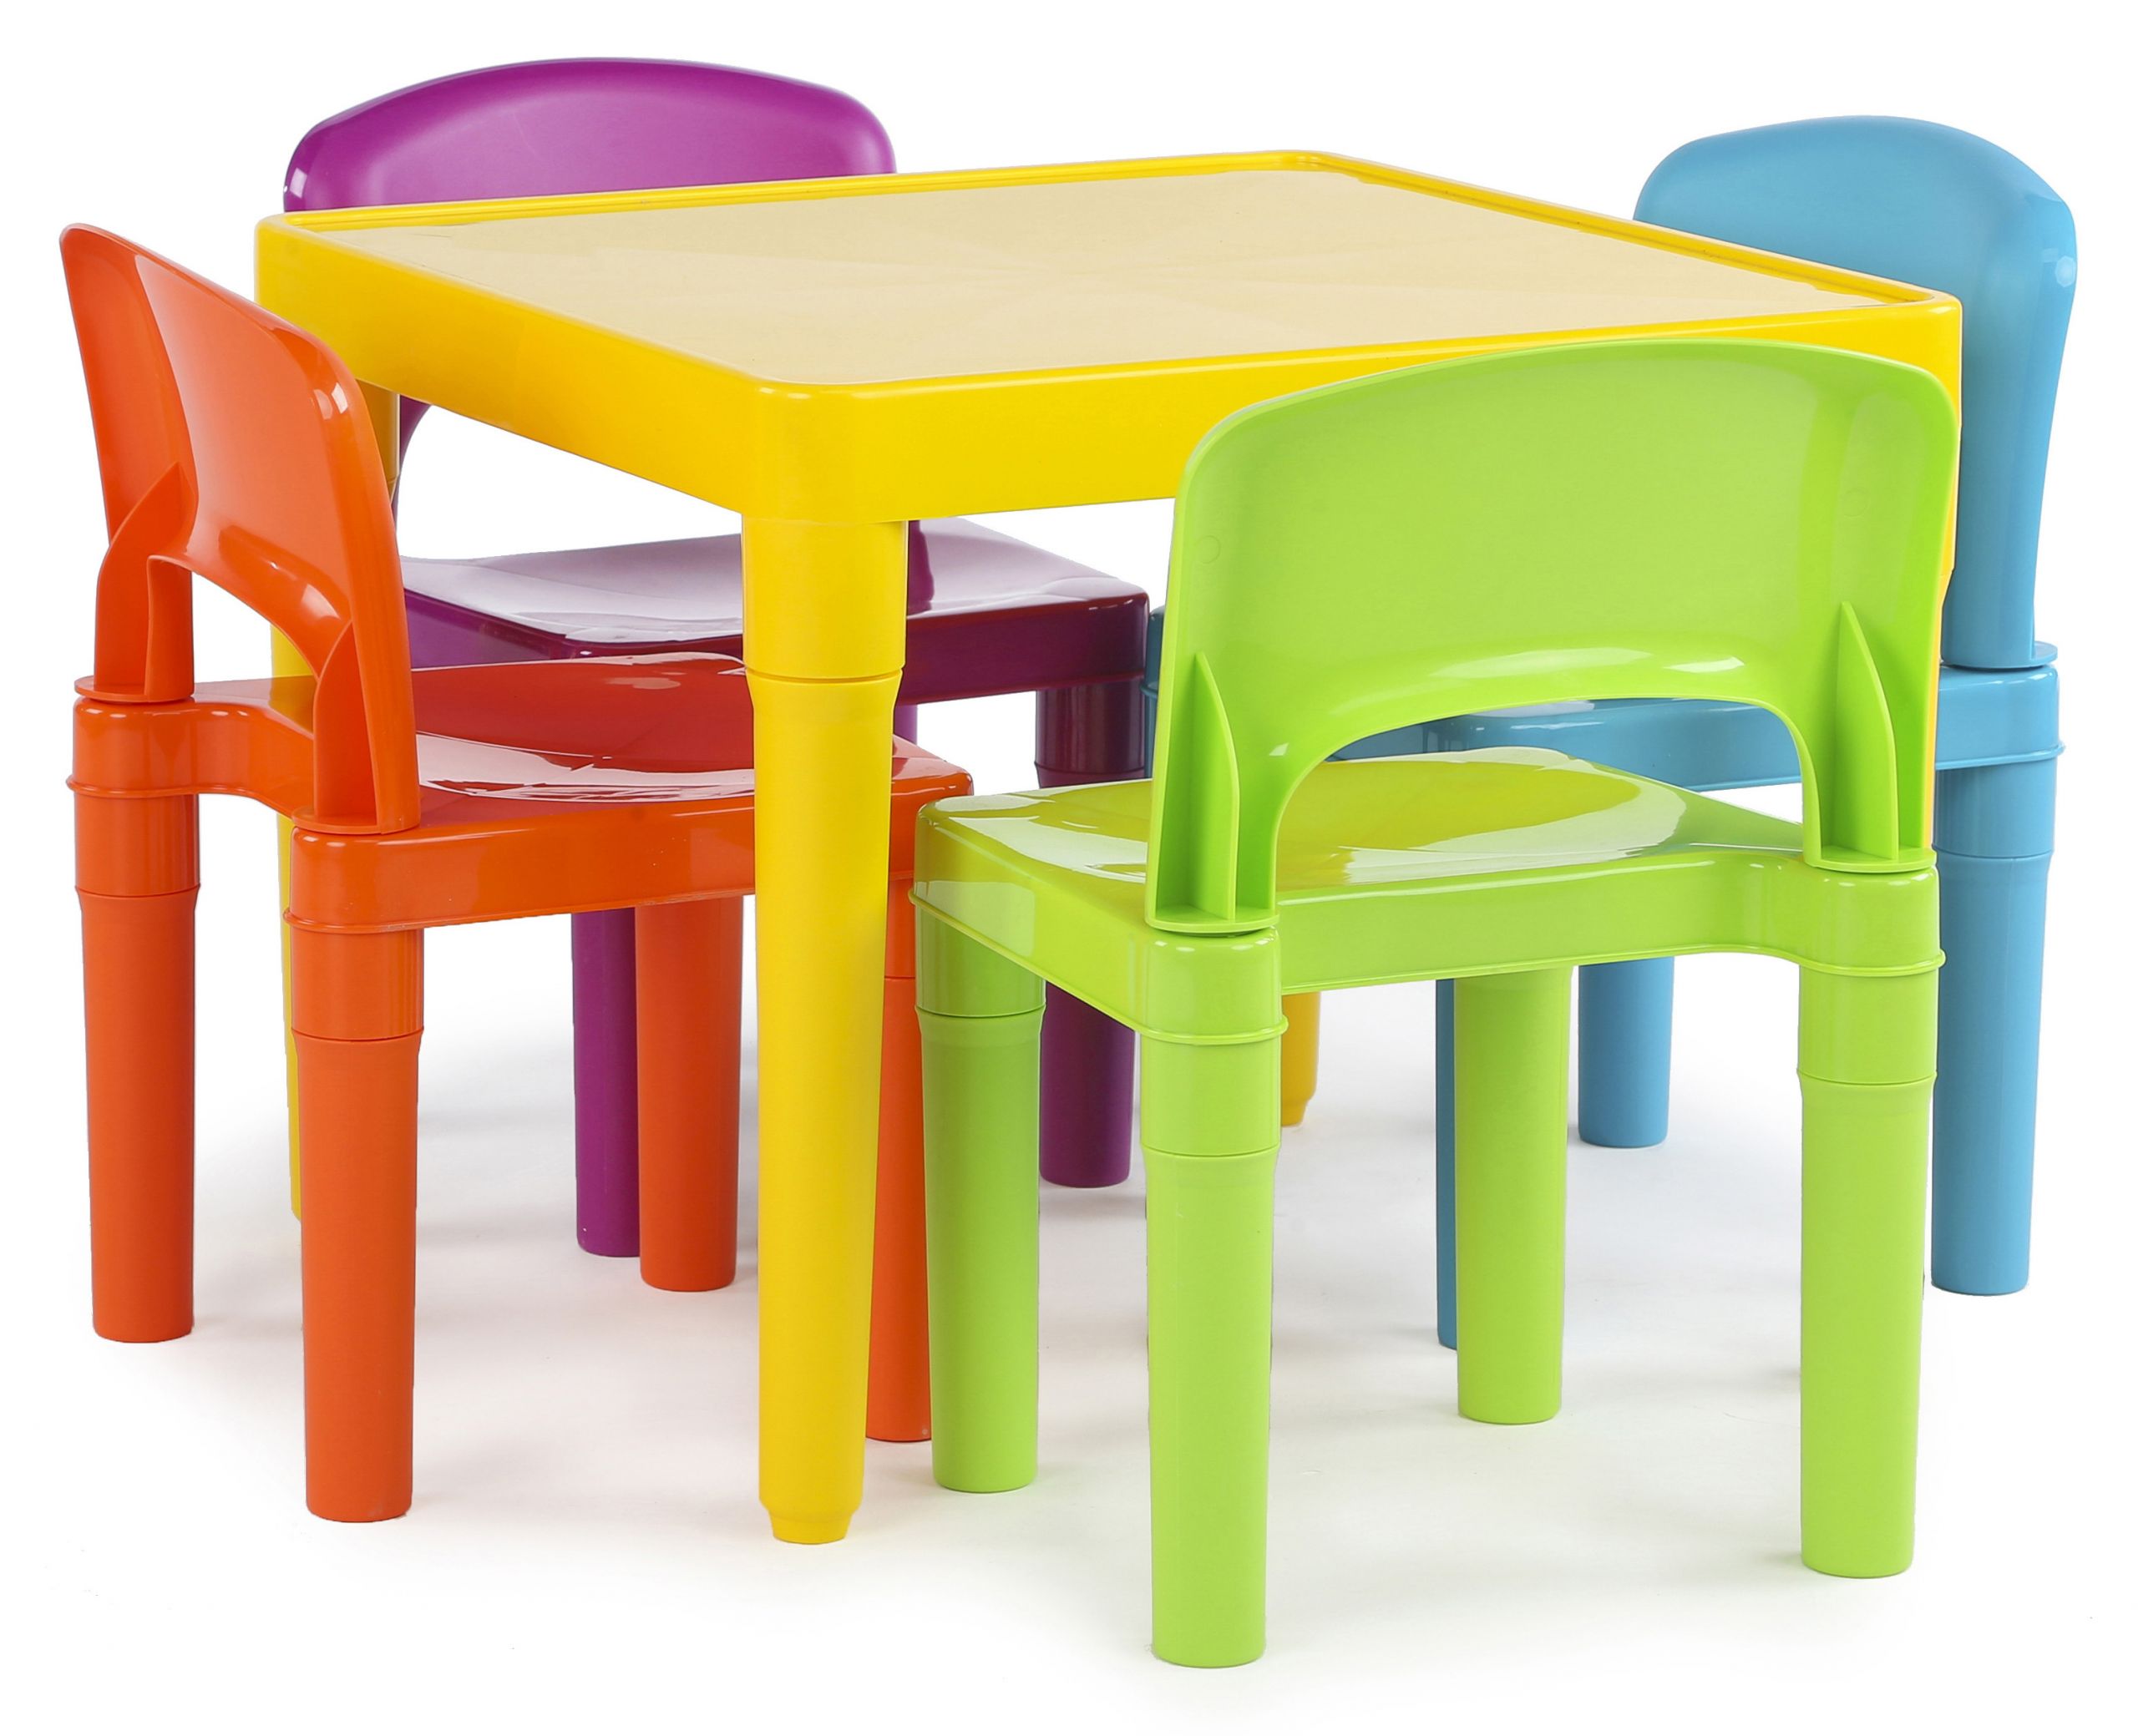 Chair For Kids
 Tot Tutors Kids Plastic Table and 4 Chairs Set Vibrant Colors